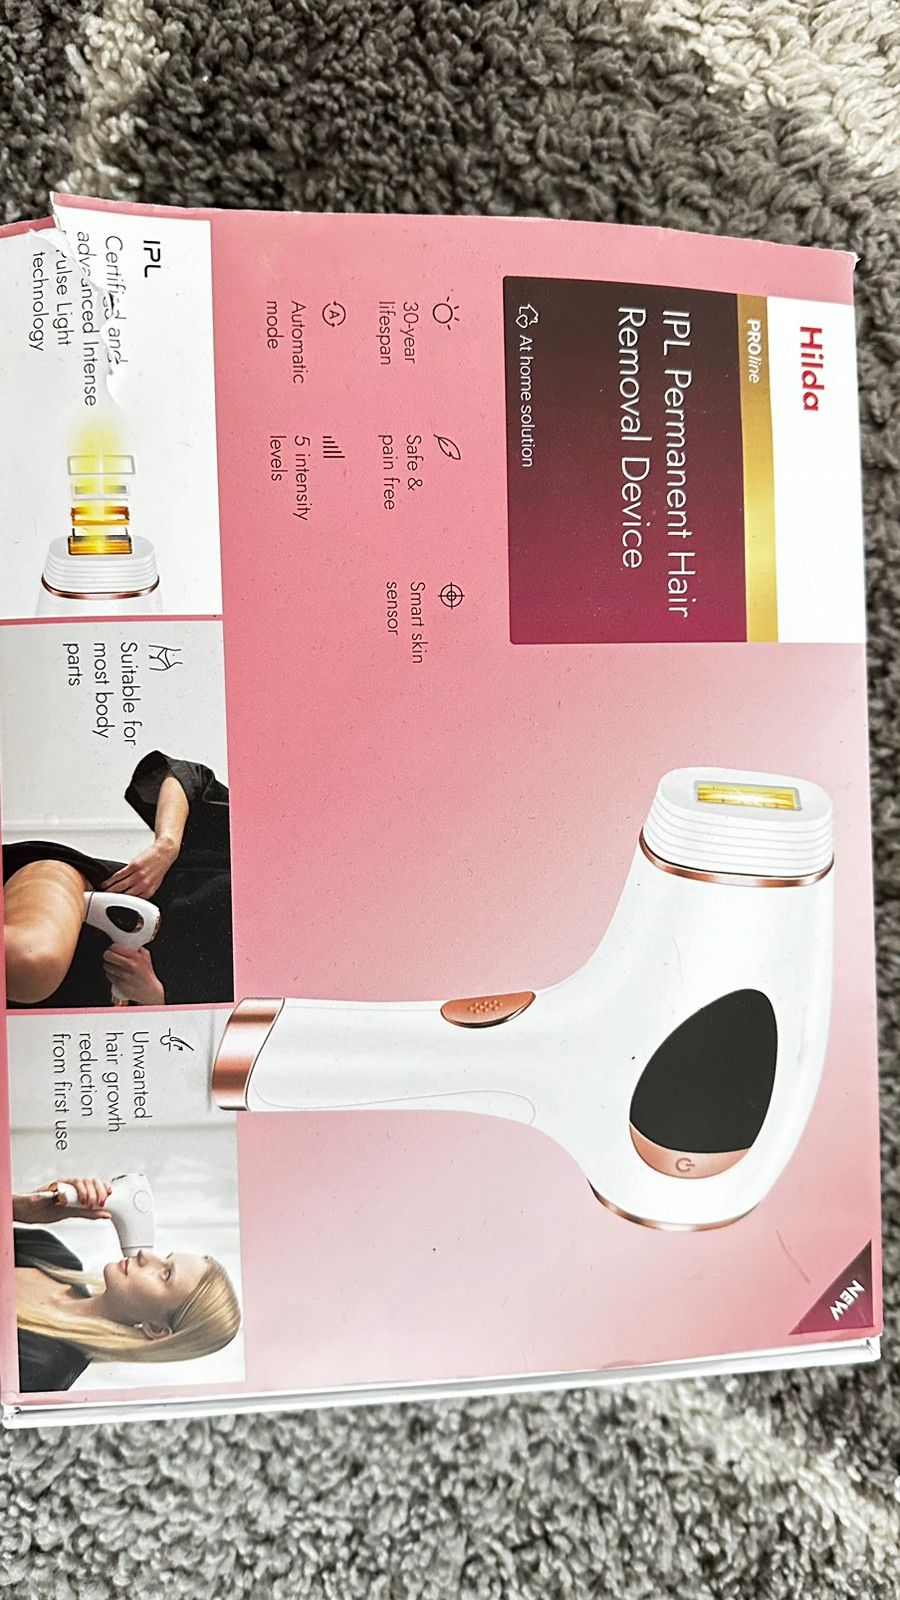 Hair removal device